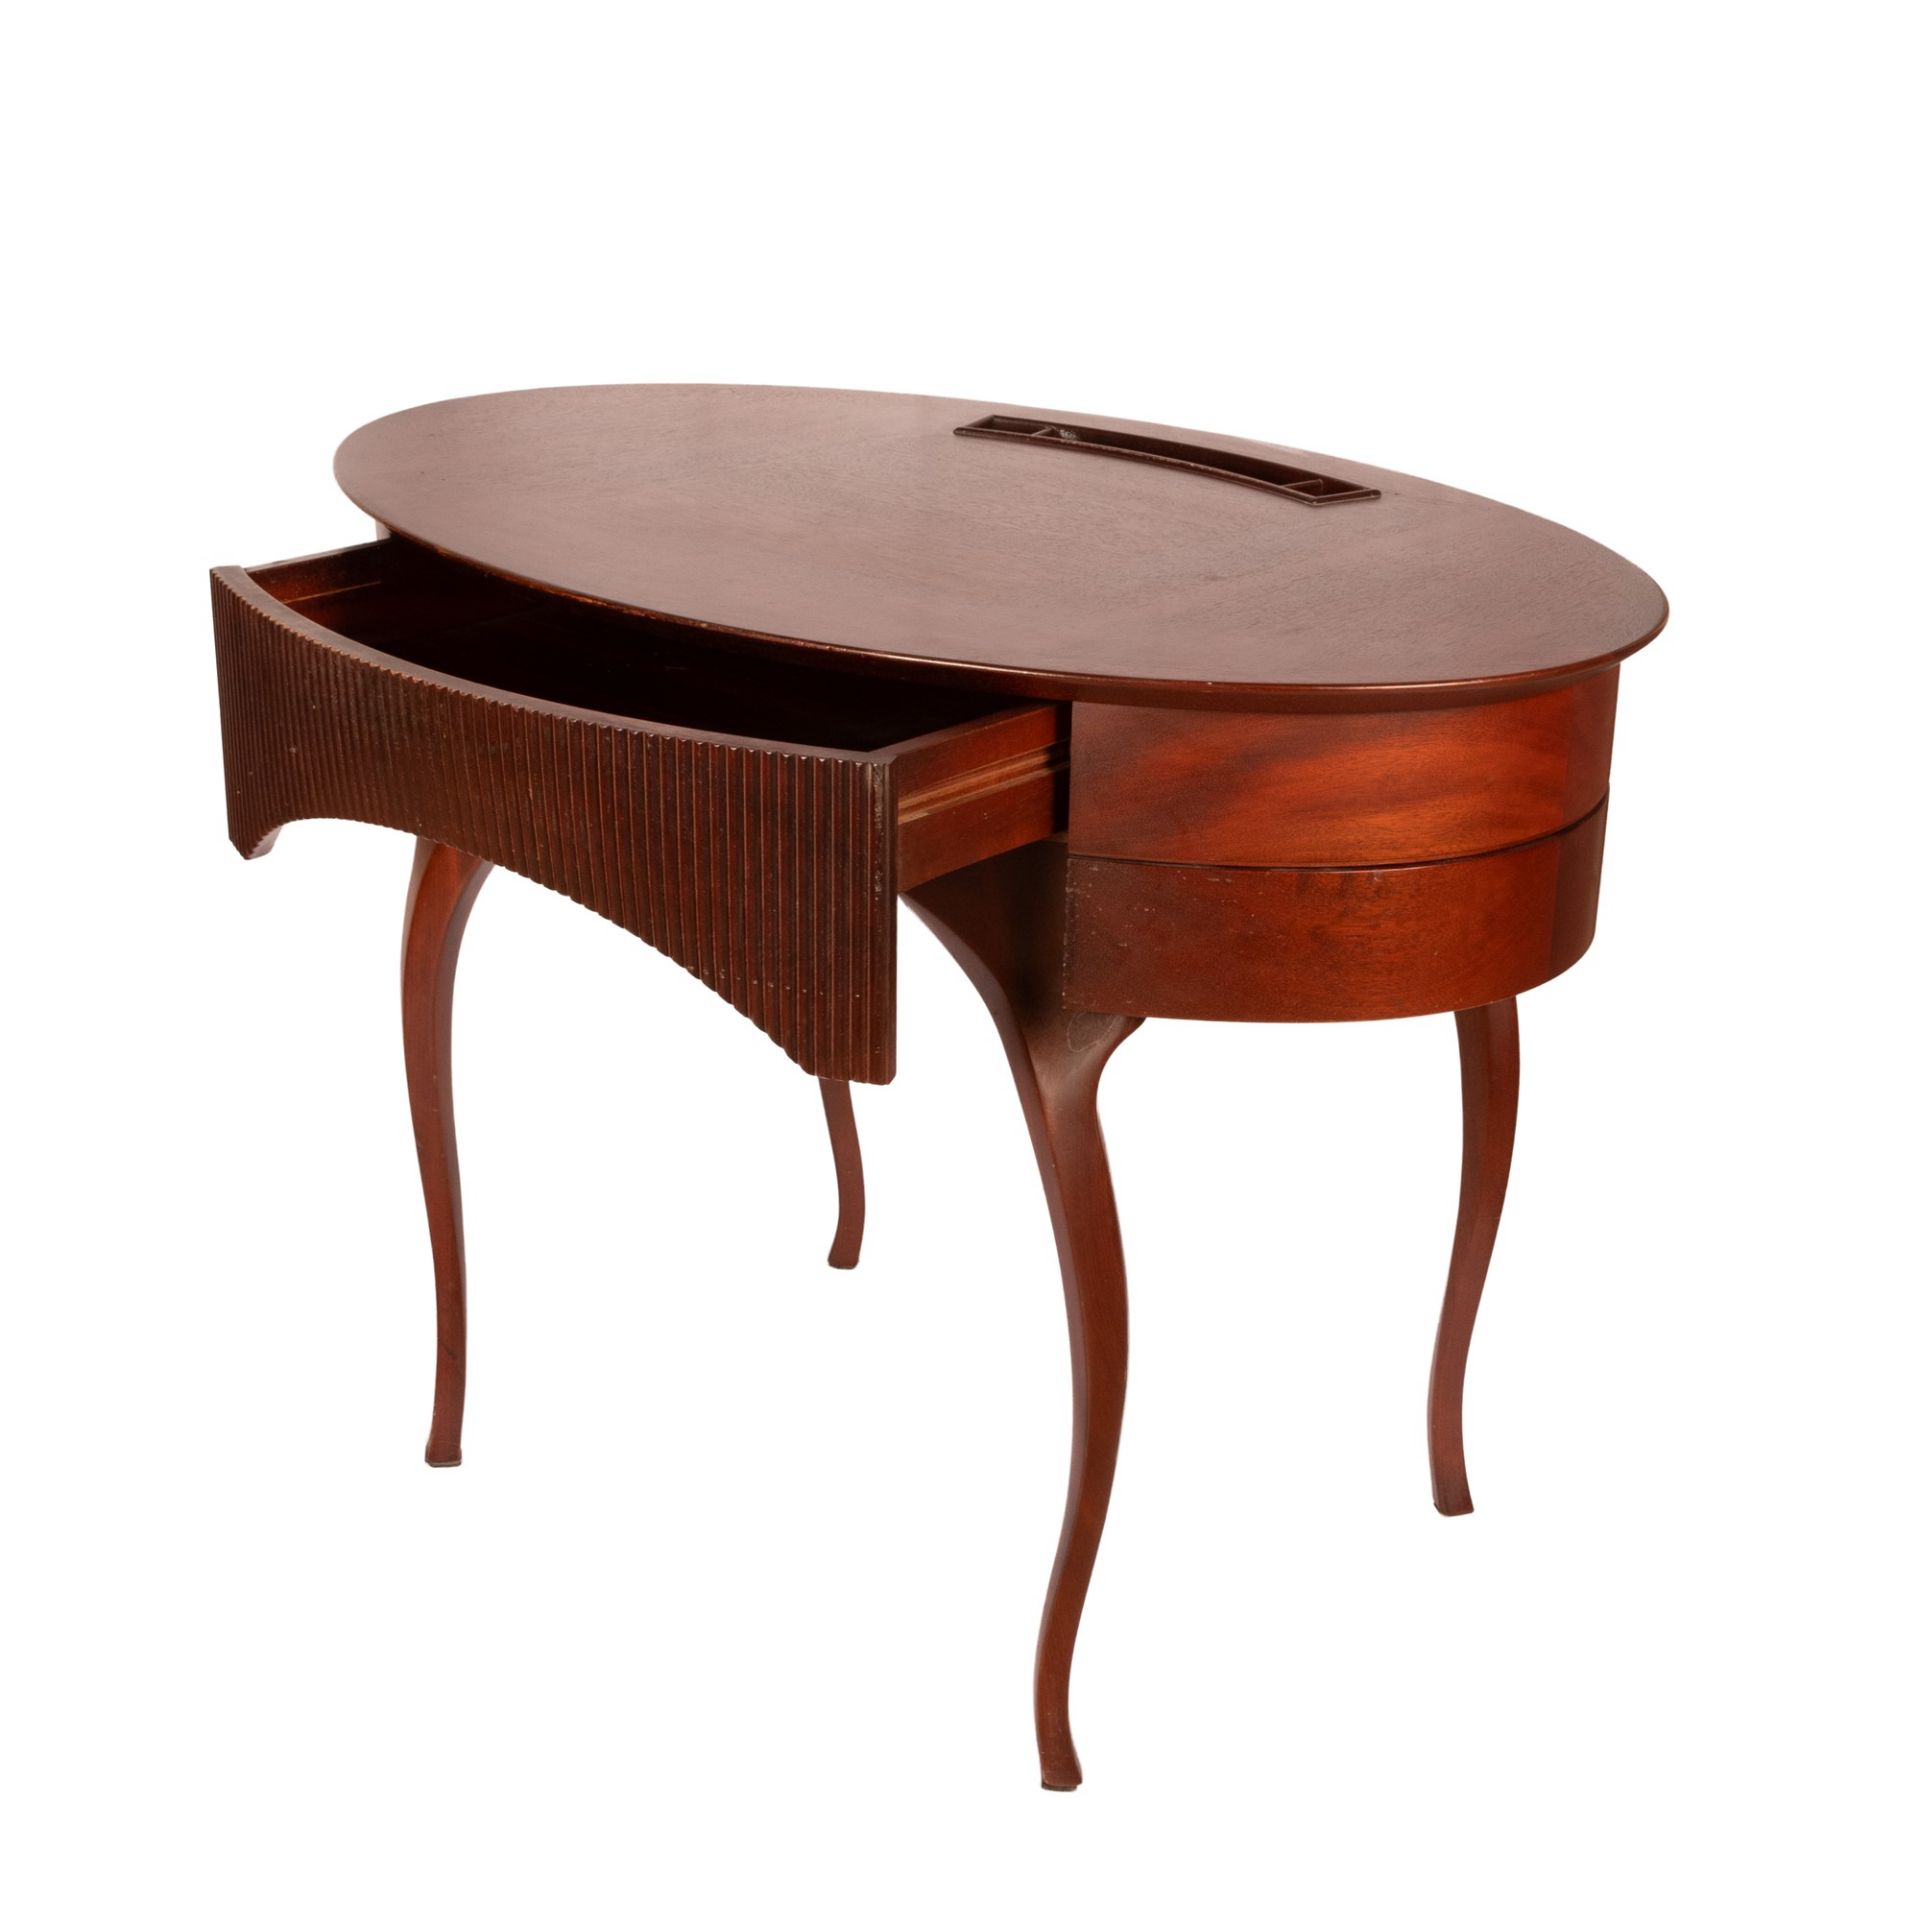 Writing desk in cherry wood - Image 6 of 25